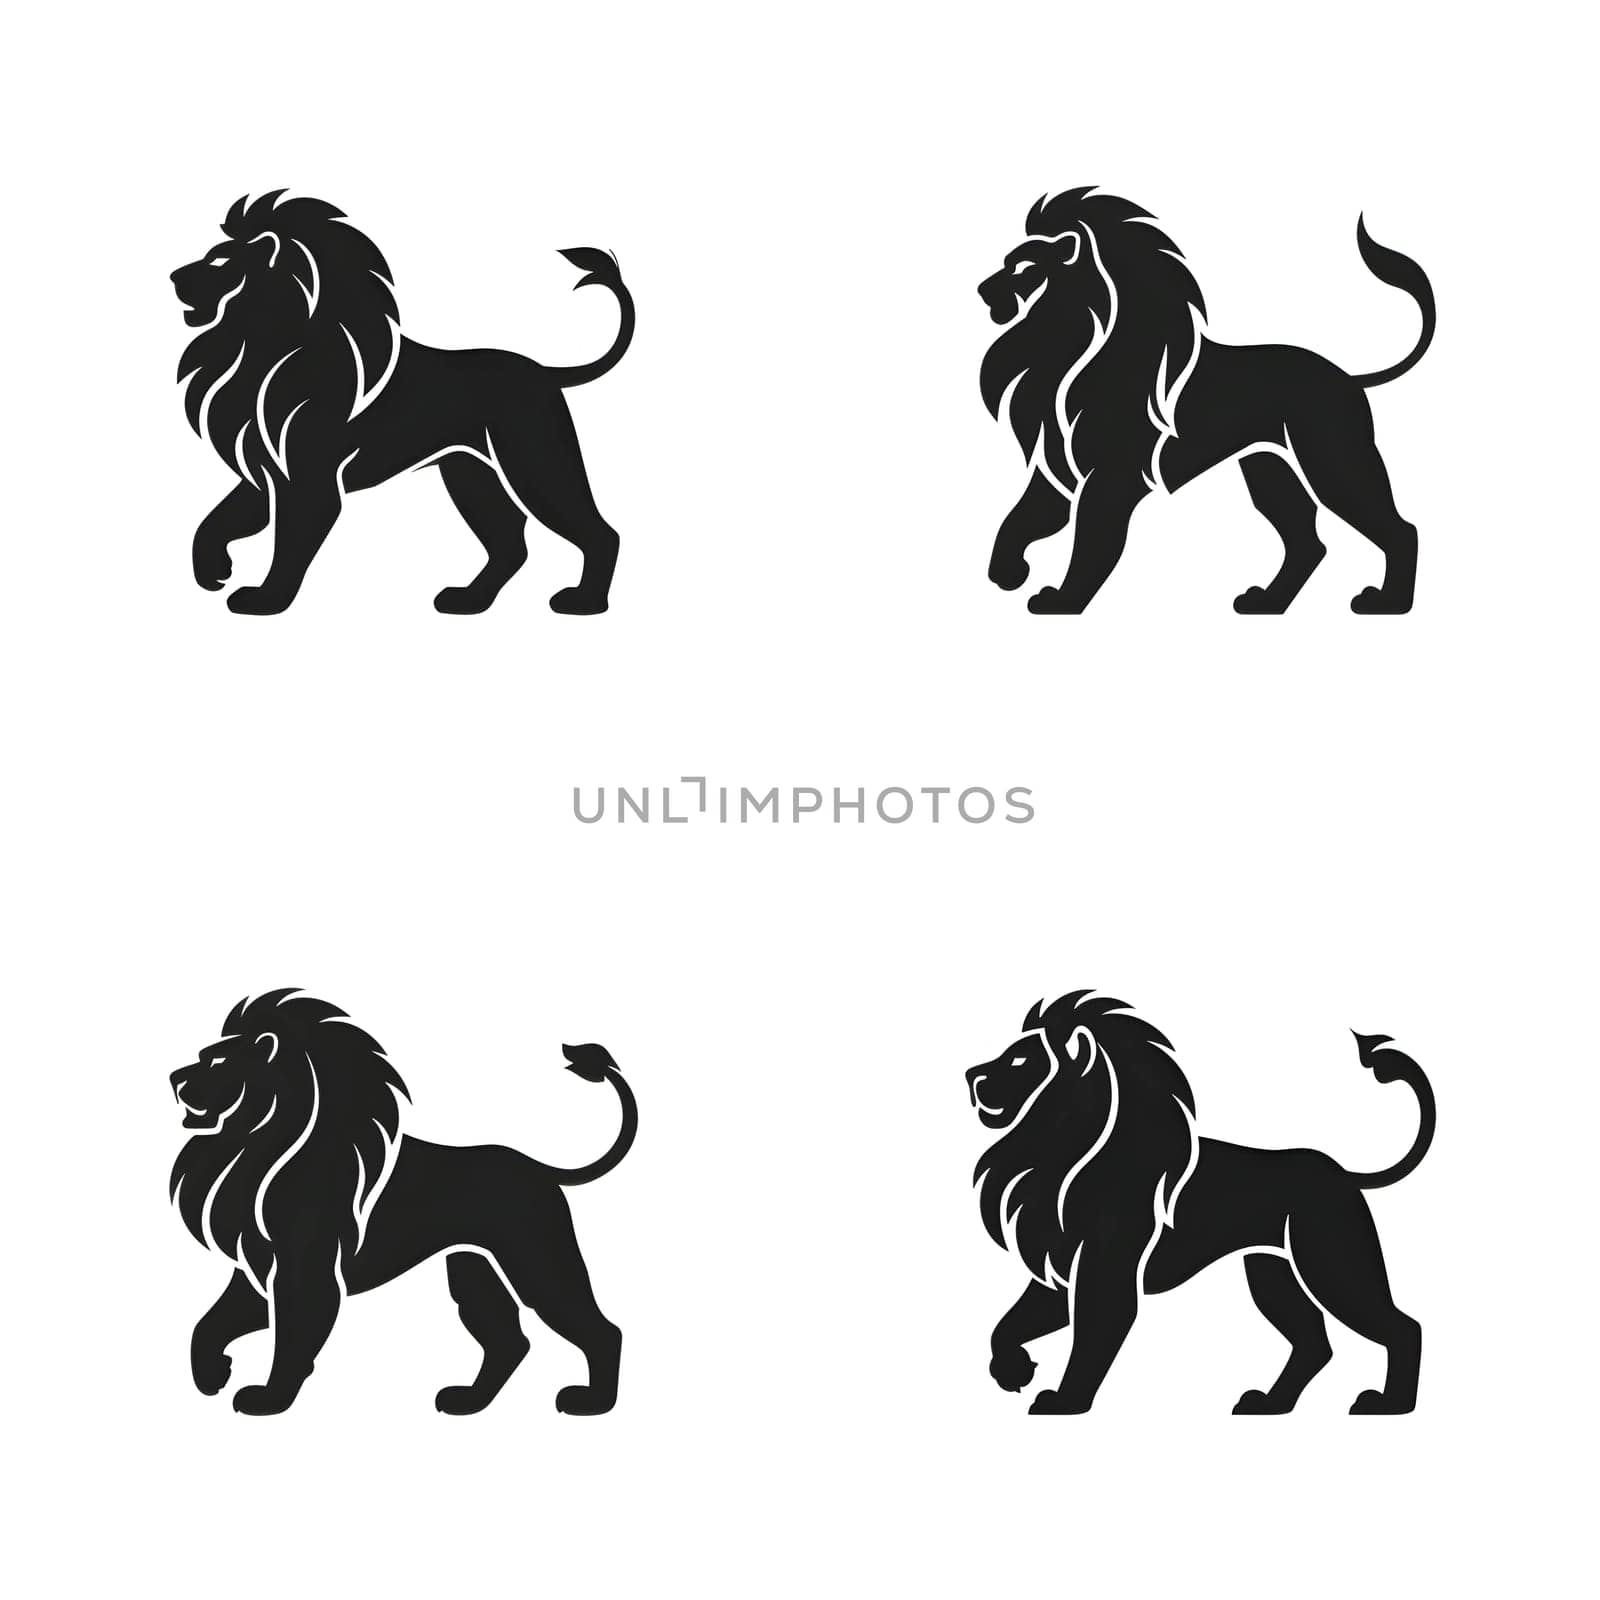 Vector illustration of a lion in black silhouette against a clean white background, capturing graceful forms.